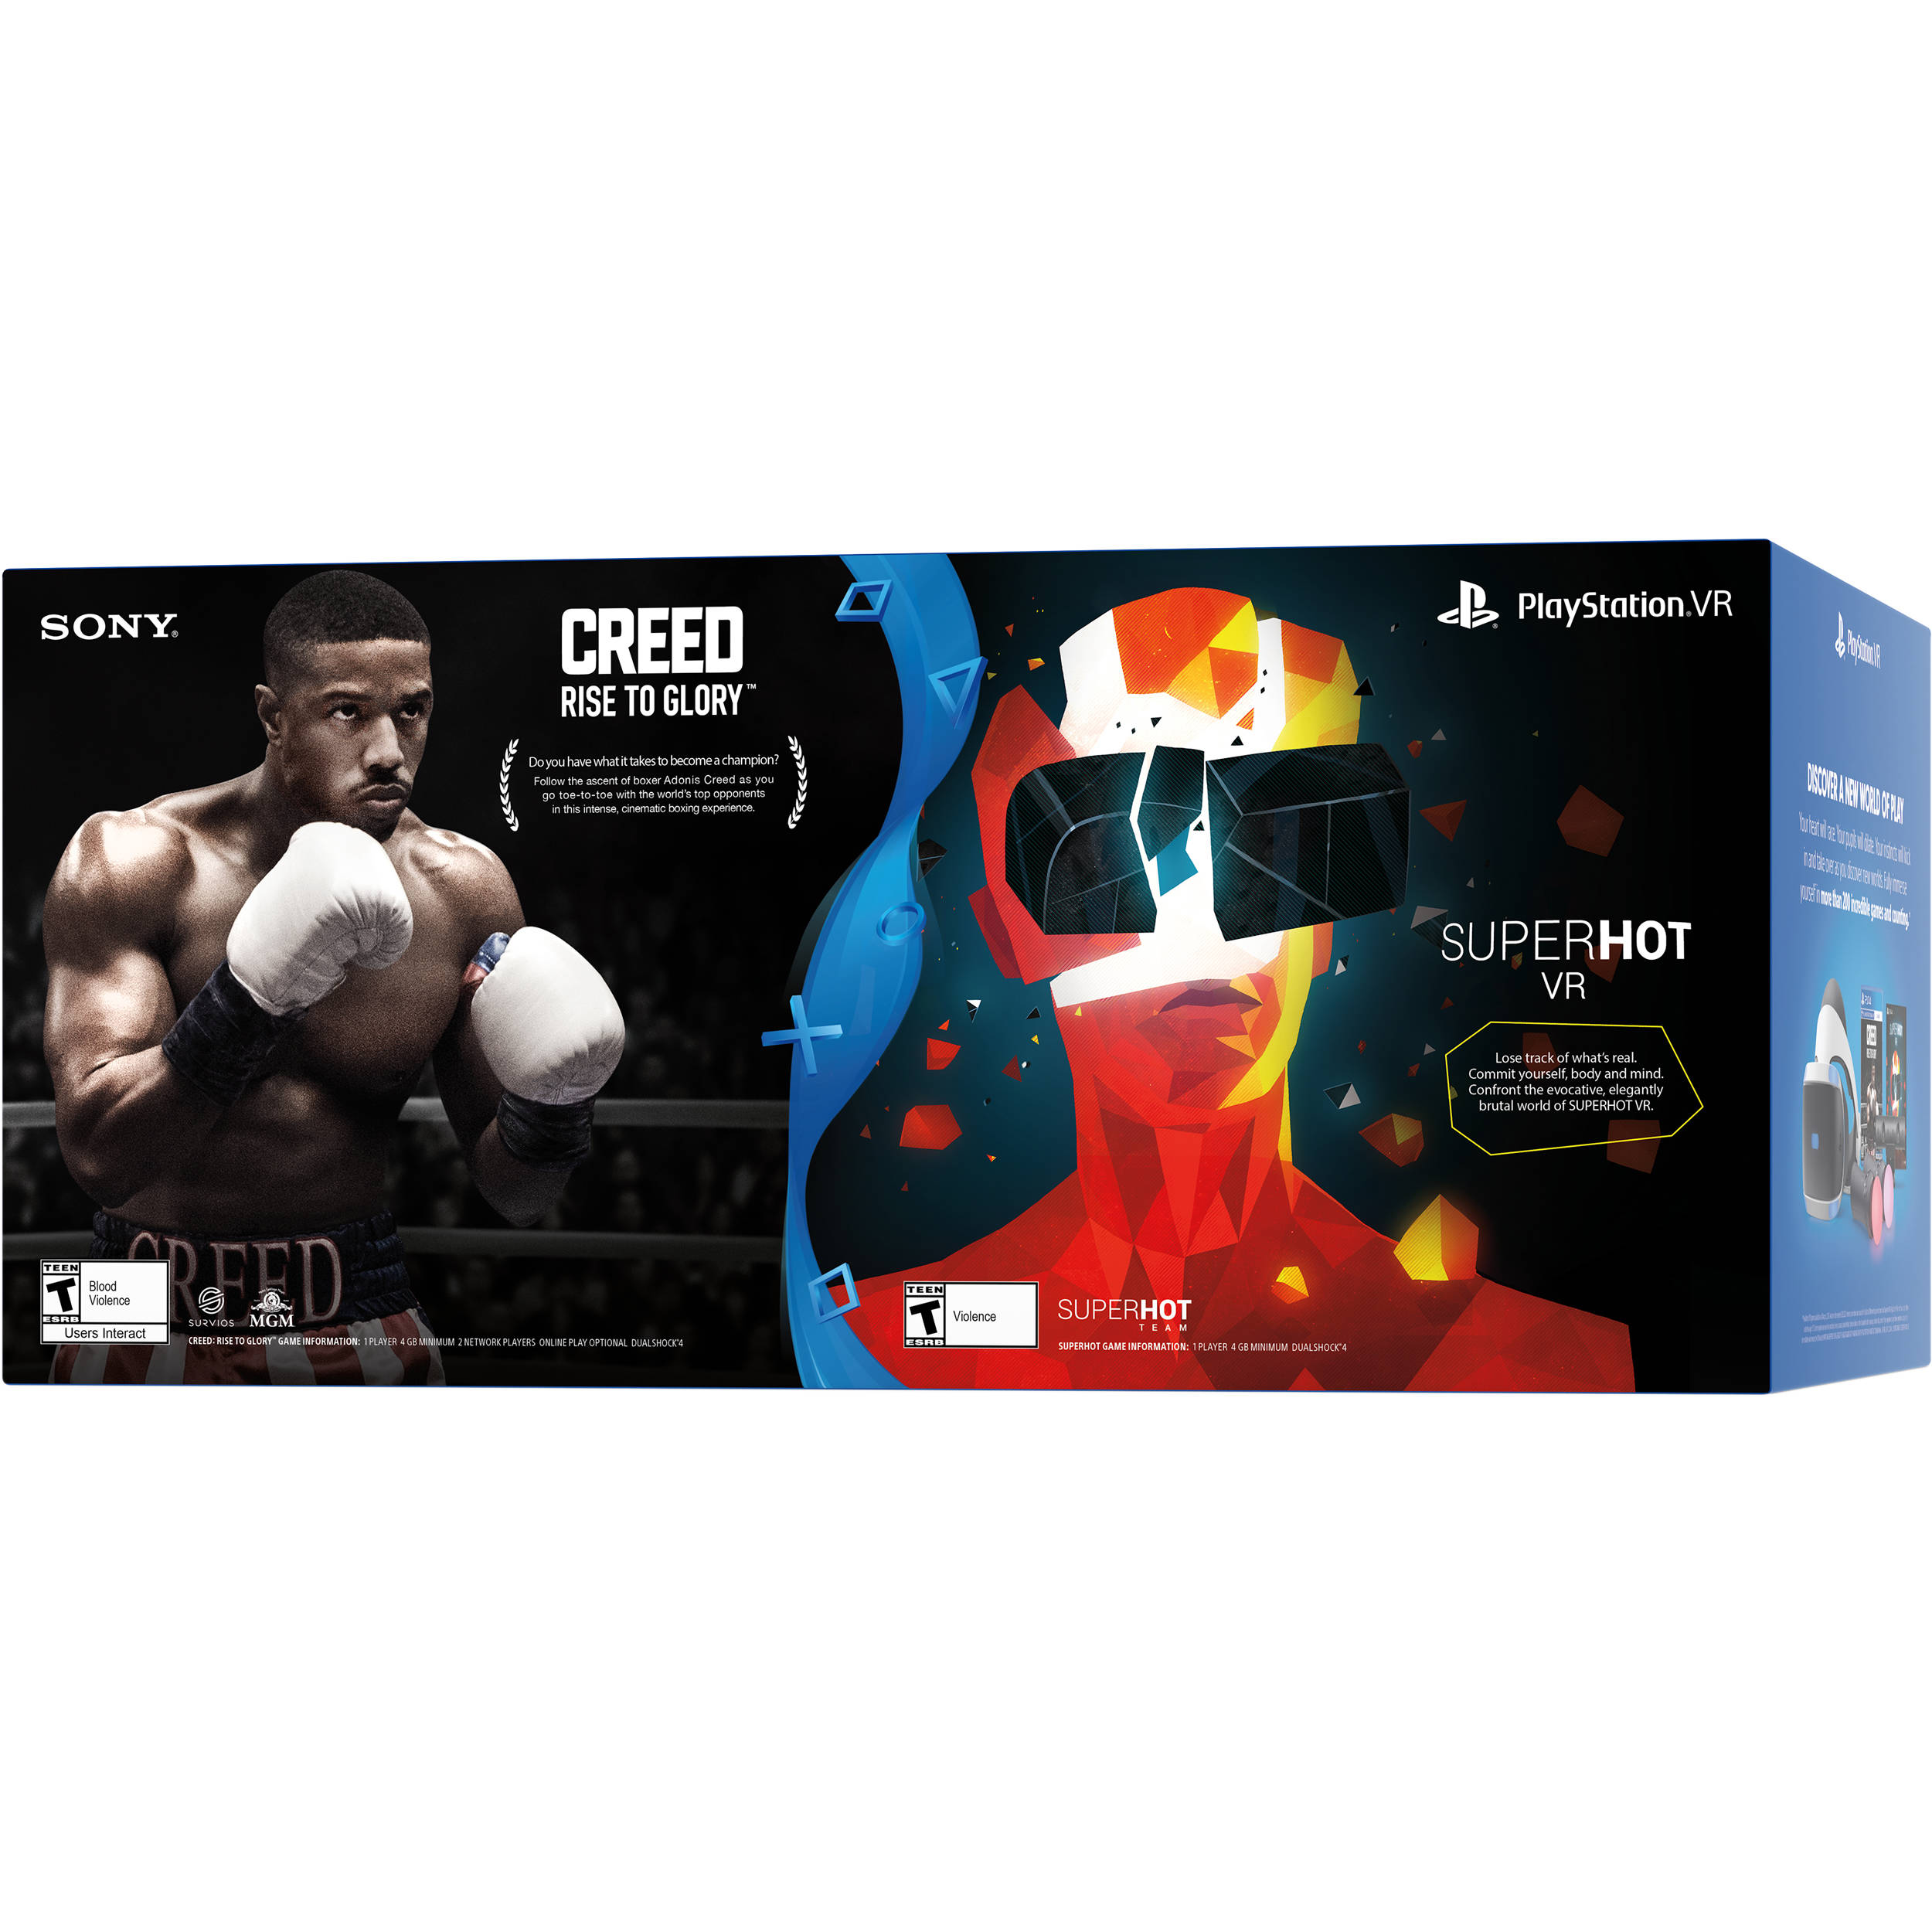 creed rise to glory ps4